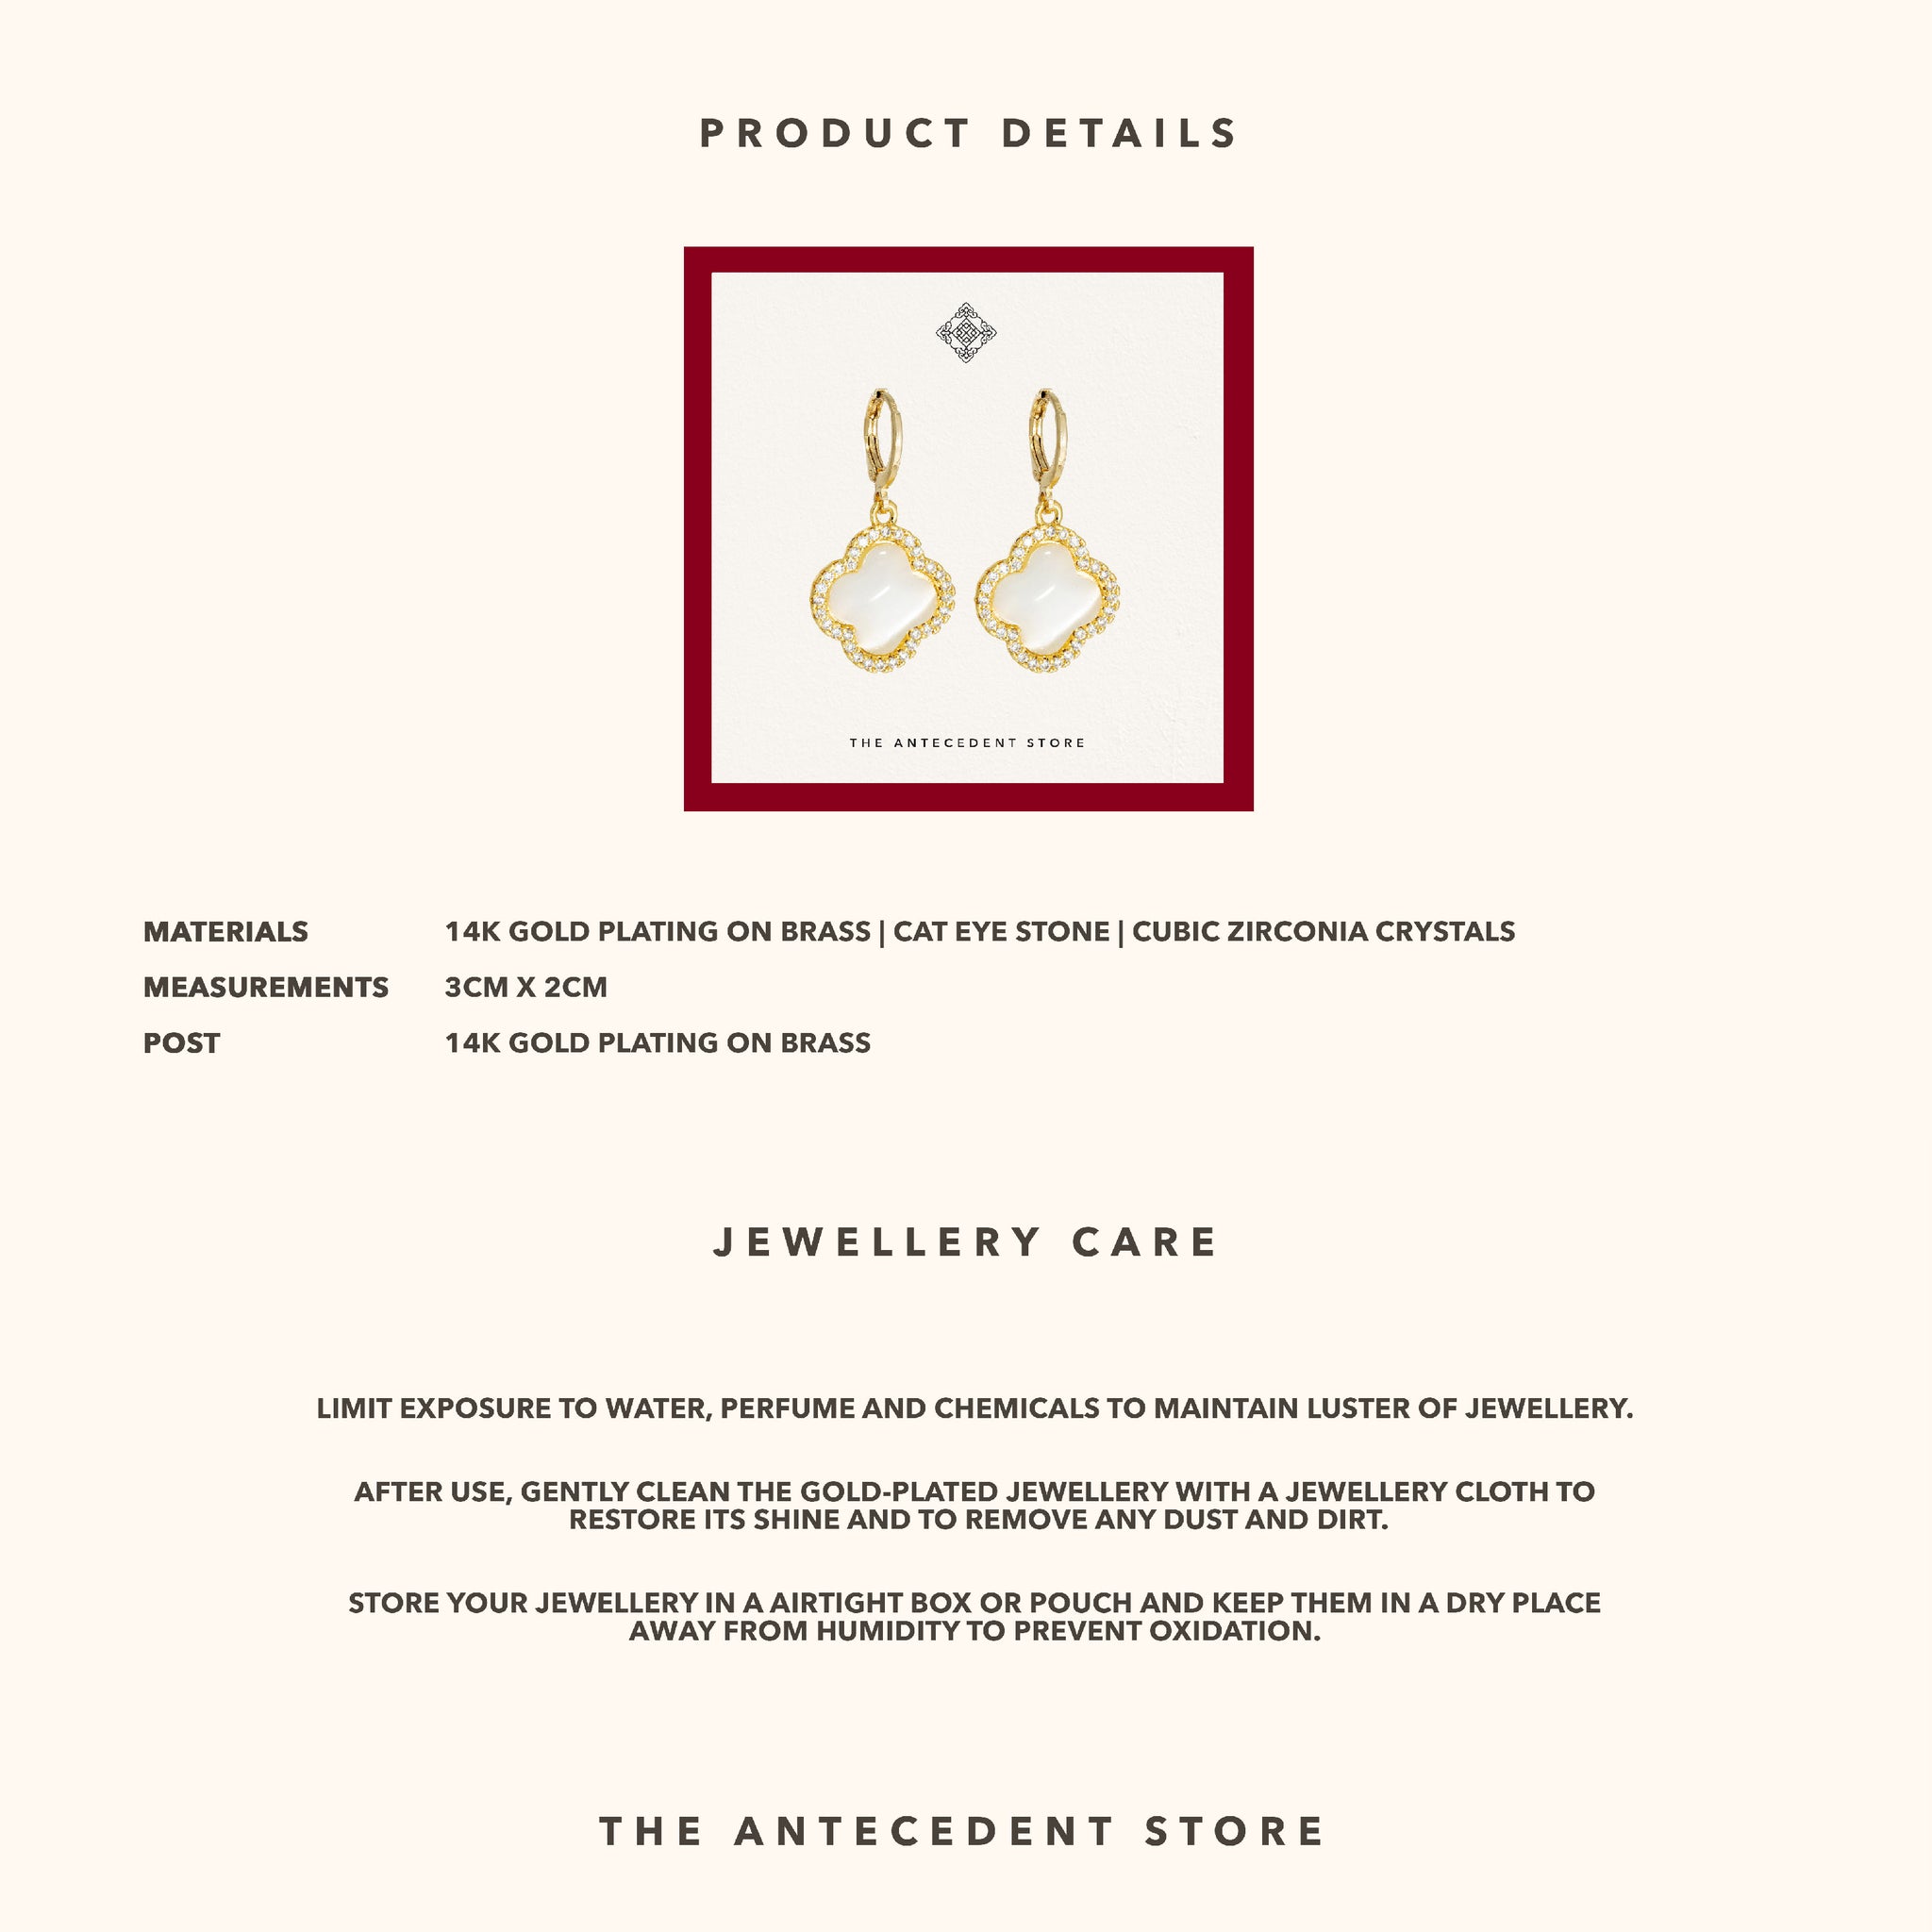 White Cat Eye Stone With Cubic Zirconia Crystals Earrings - 14K Real Gold Plated Jewellery